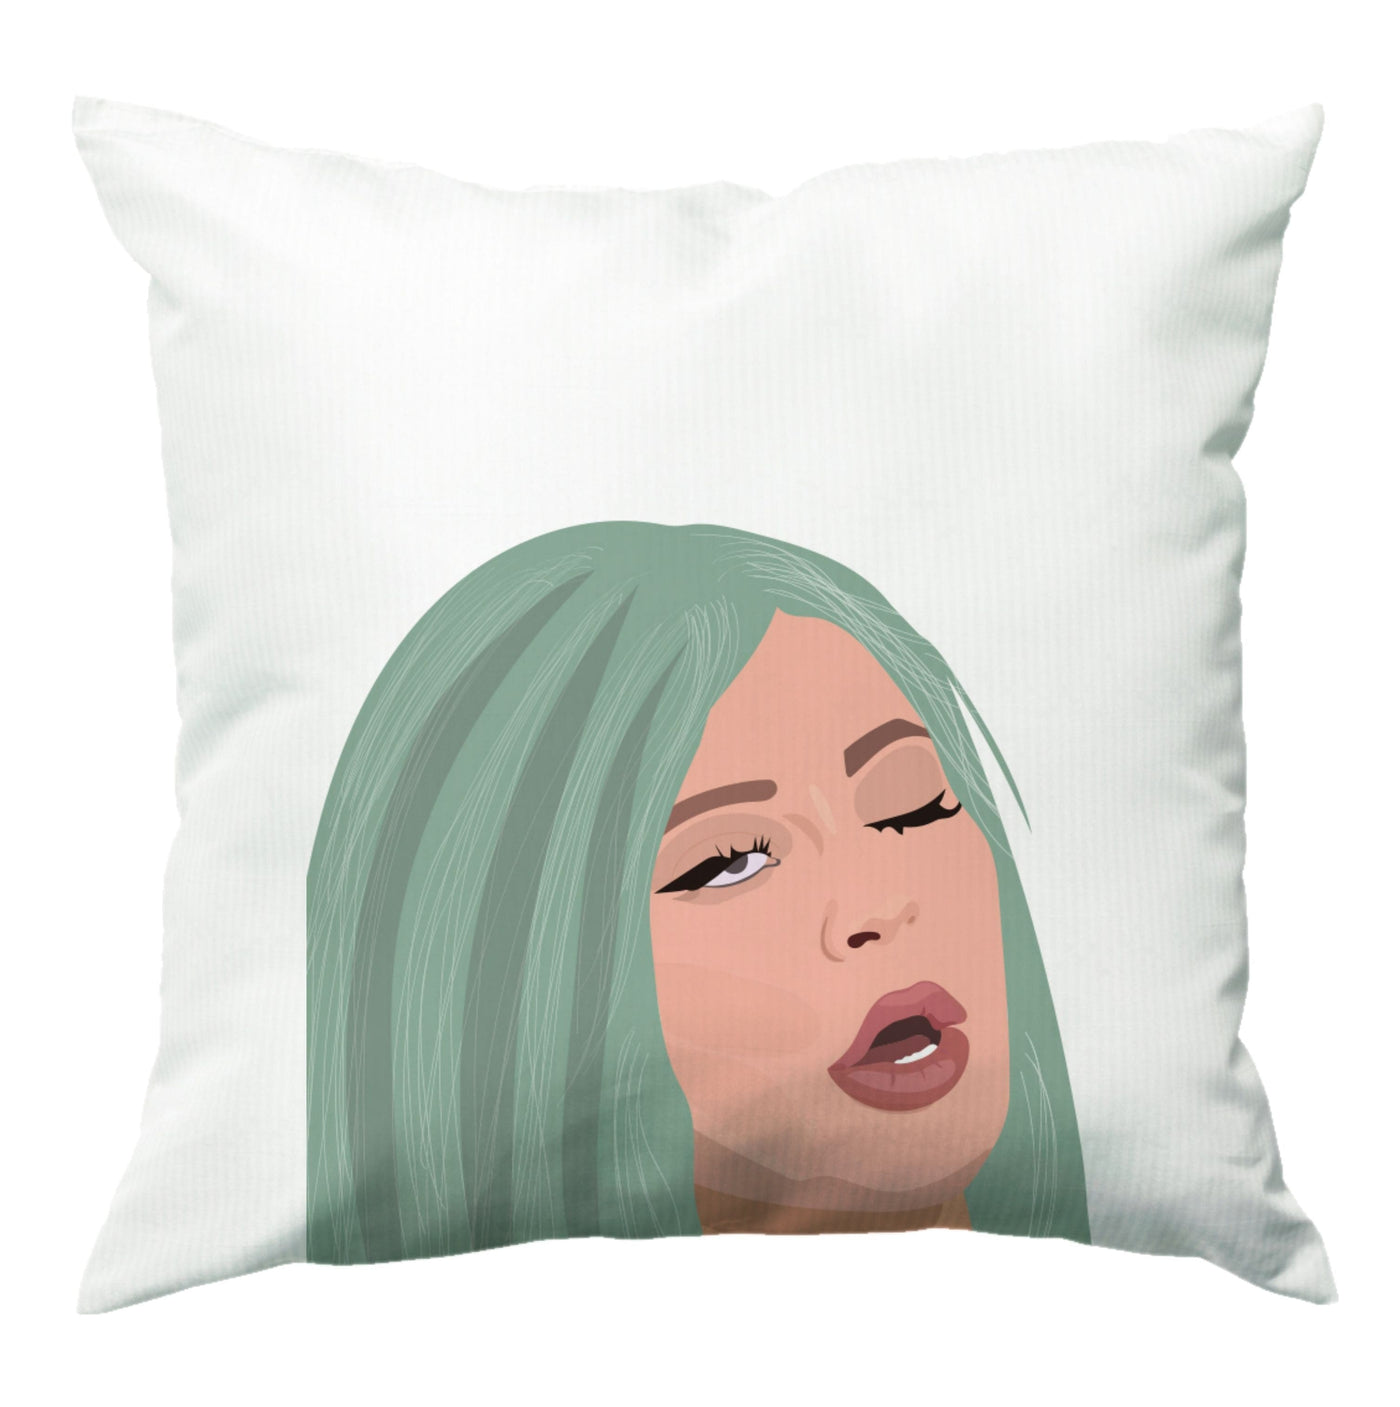 Kylie Jenner - Ready For My Close Up Cushion